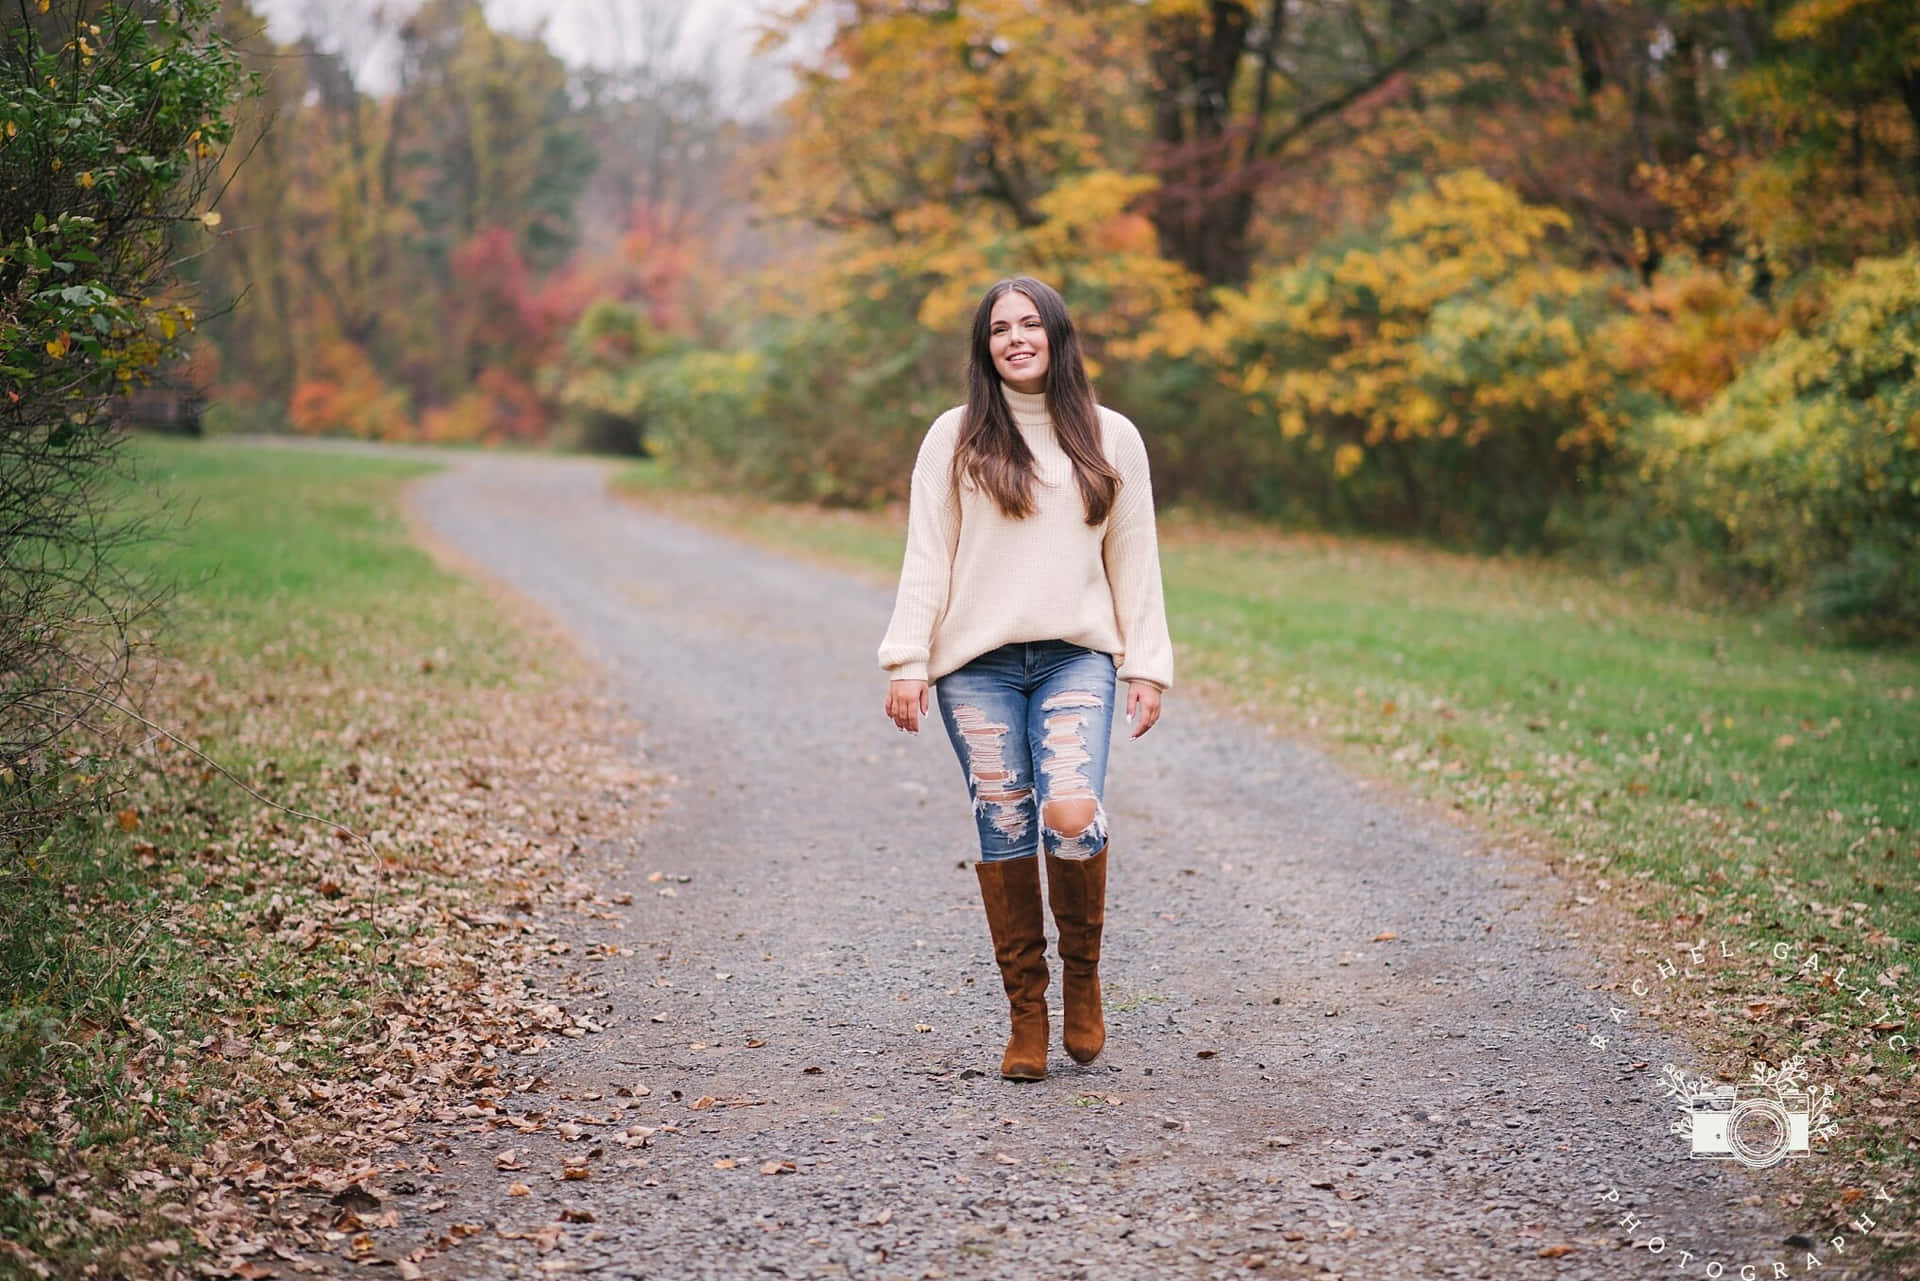 A Girl In A Sweater And Boots Walking Down A Dirt Road